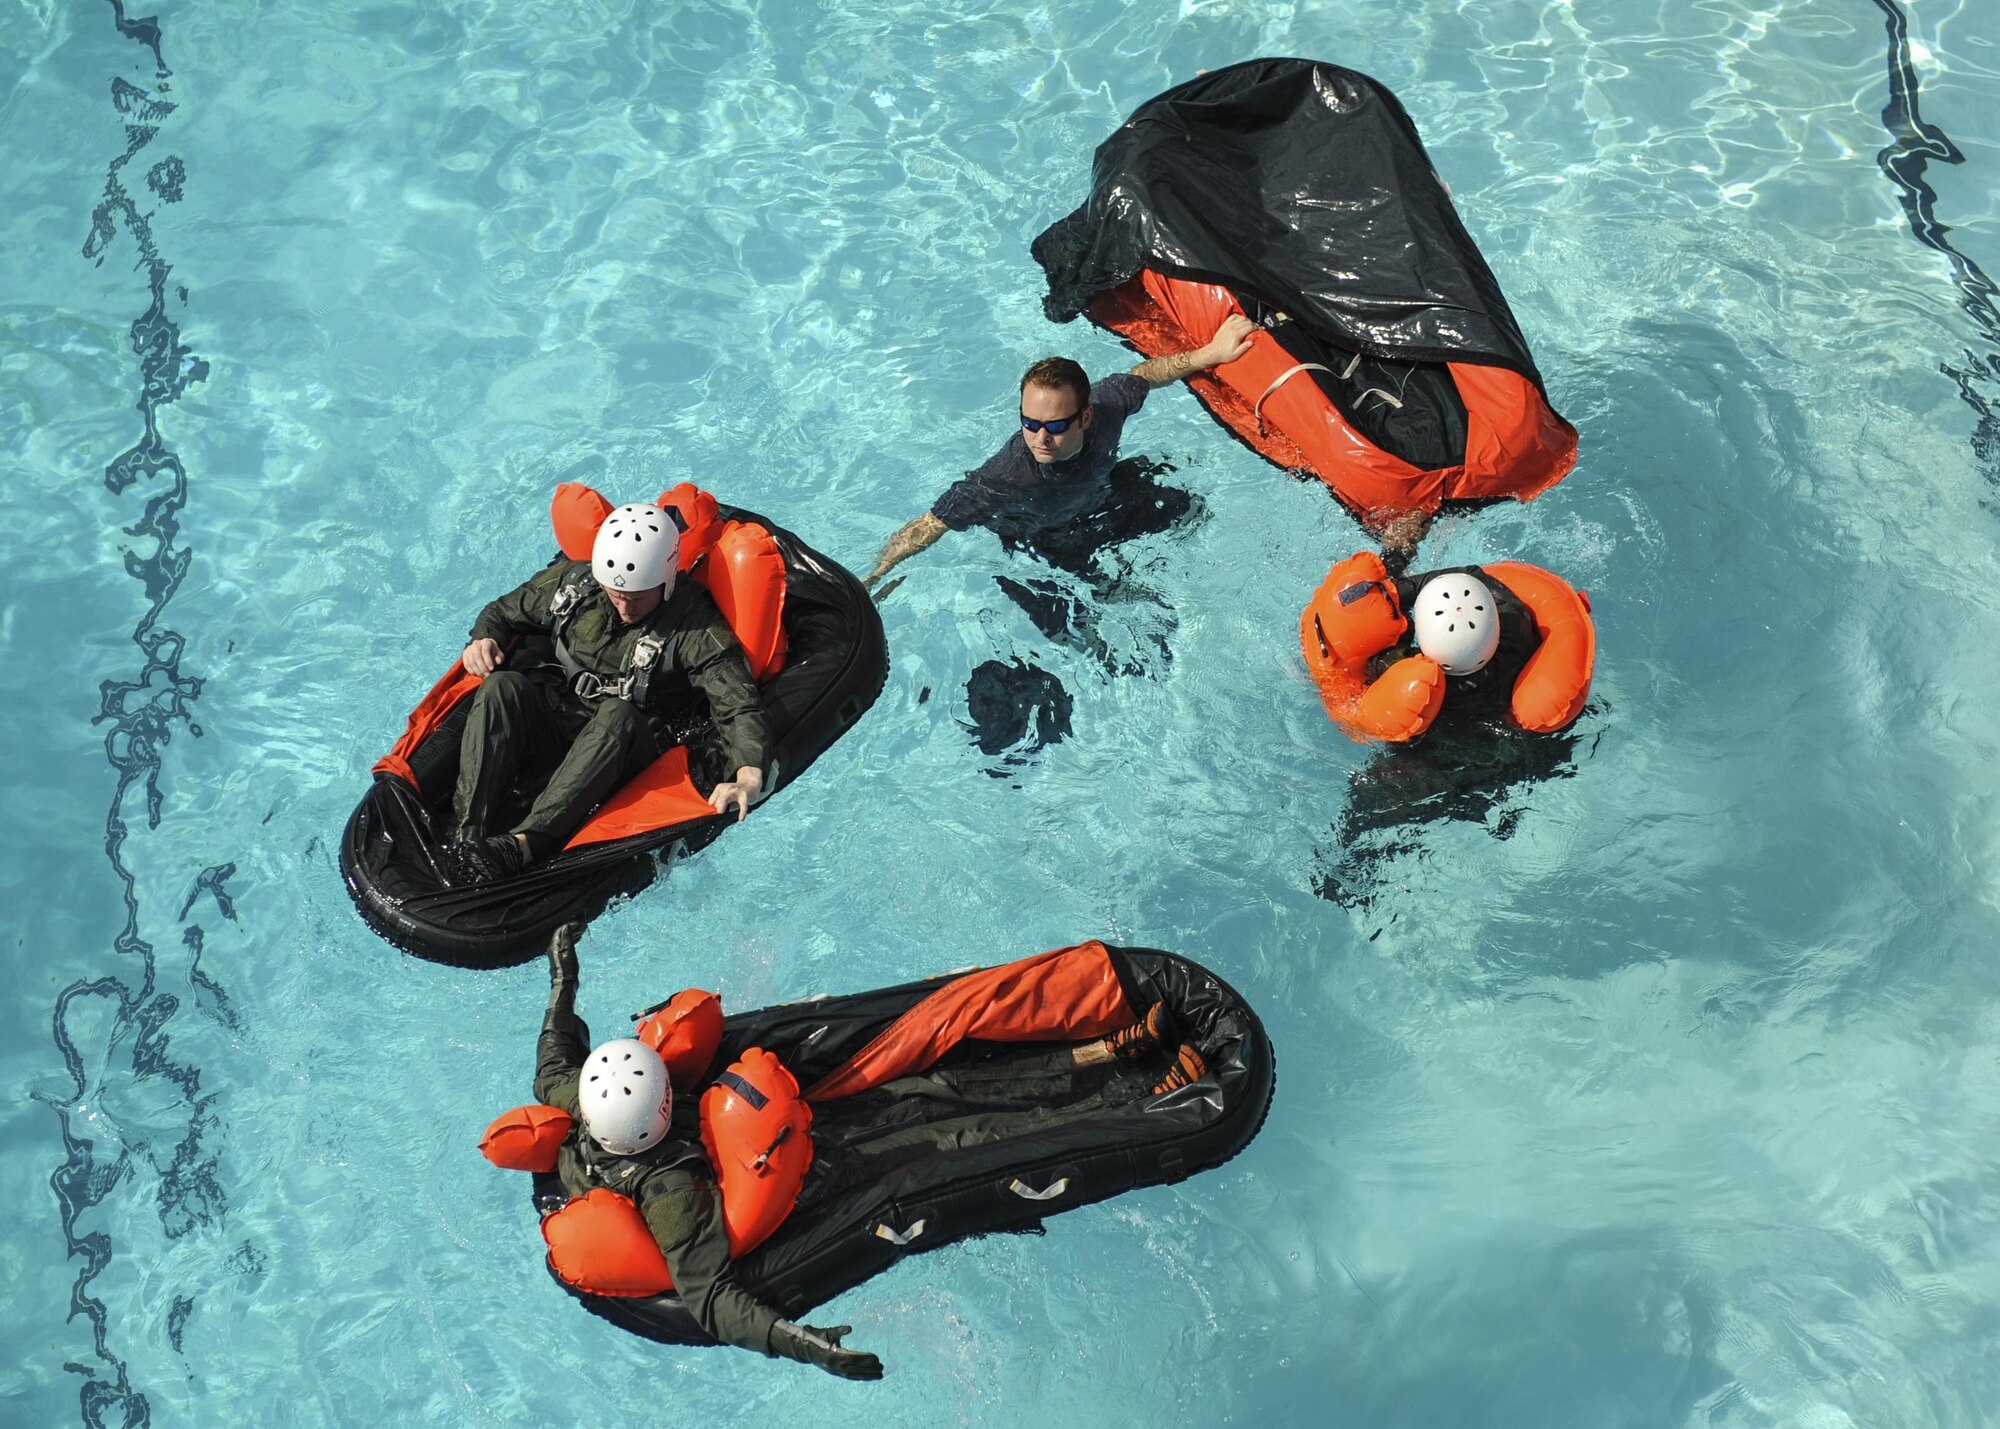 U.S. Air Force Tech. Sgt. Jerrod Mink, 19th Operations Support Squadron survival, evasion, resistance and escape specialist, center, instructs C-130J aircrew members how to properly use inflatable single-person life rafts June 24, 2016, at Little Rock Air Force Base, Ark. Along with floatation devices, the C-130J is equipped with helmets, oxygen masks and survival kits in case of emergencies. (U.S. Air Force photo by Senior Airman Harry Brexel)